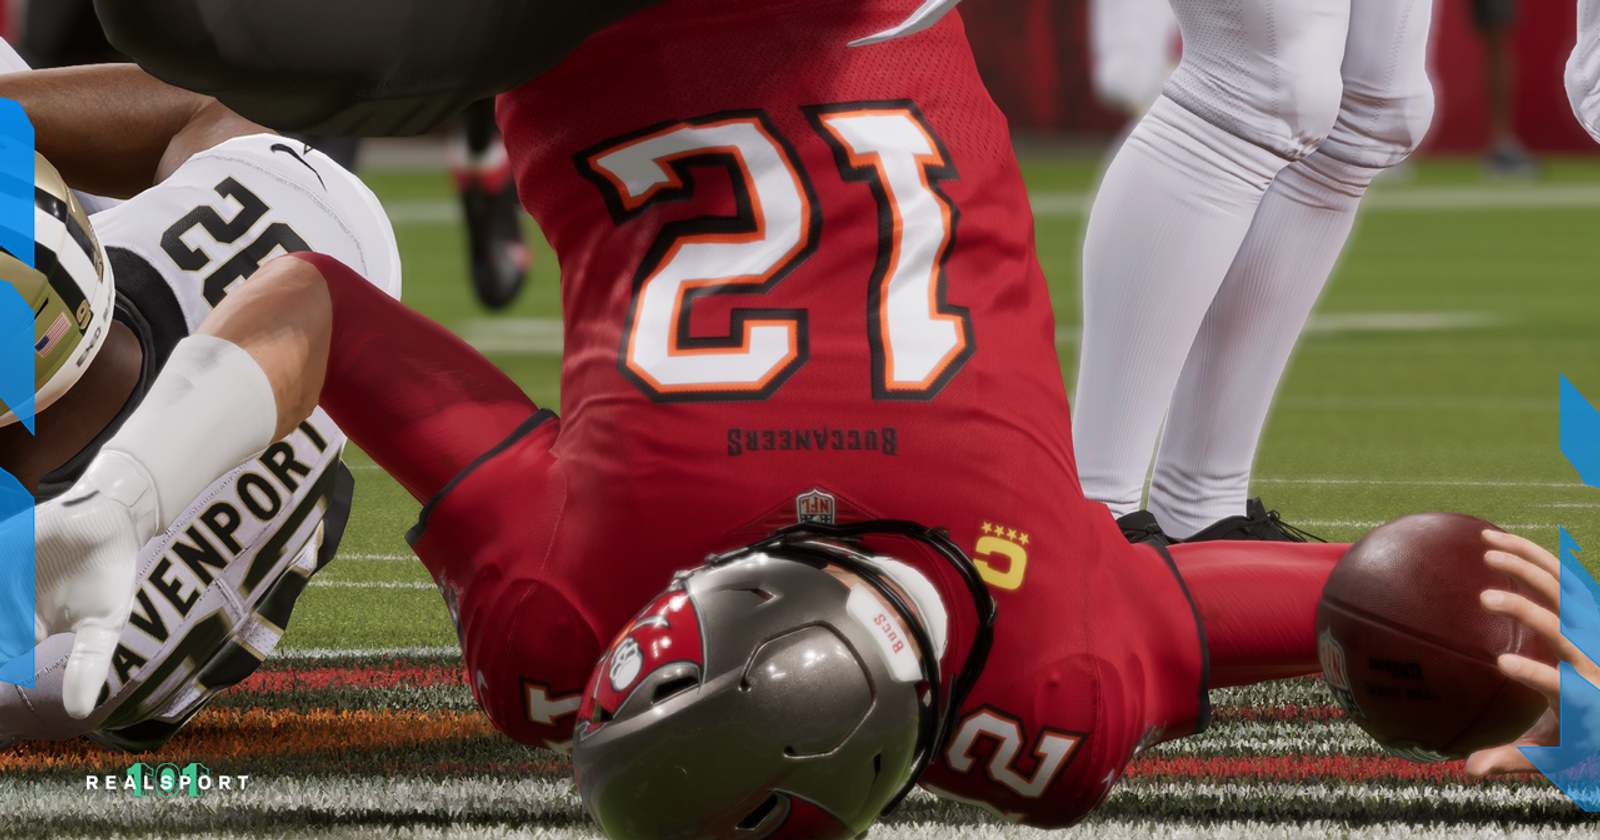 Madden 22 January Title Update could bring more Franchise updates